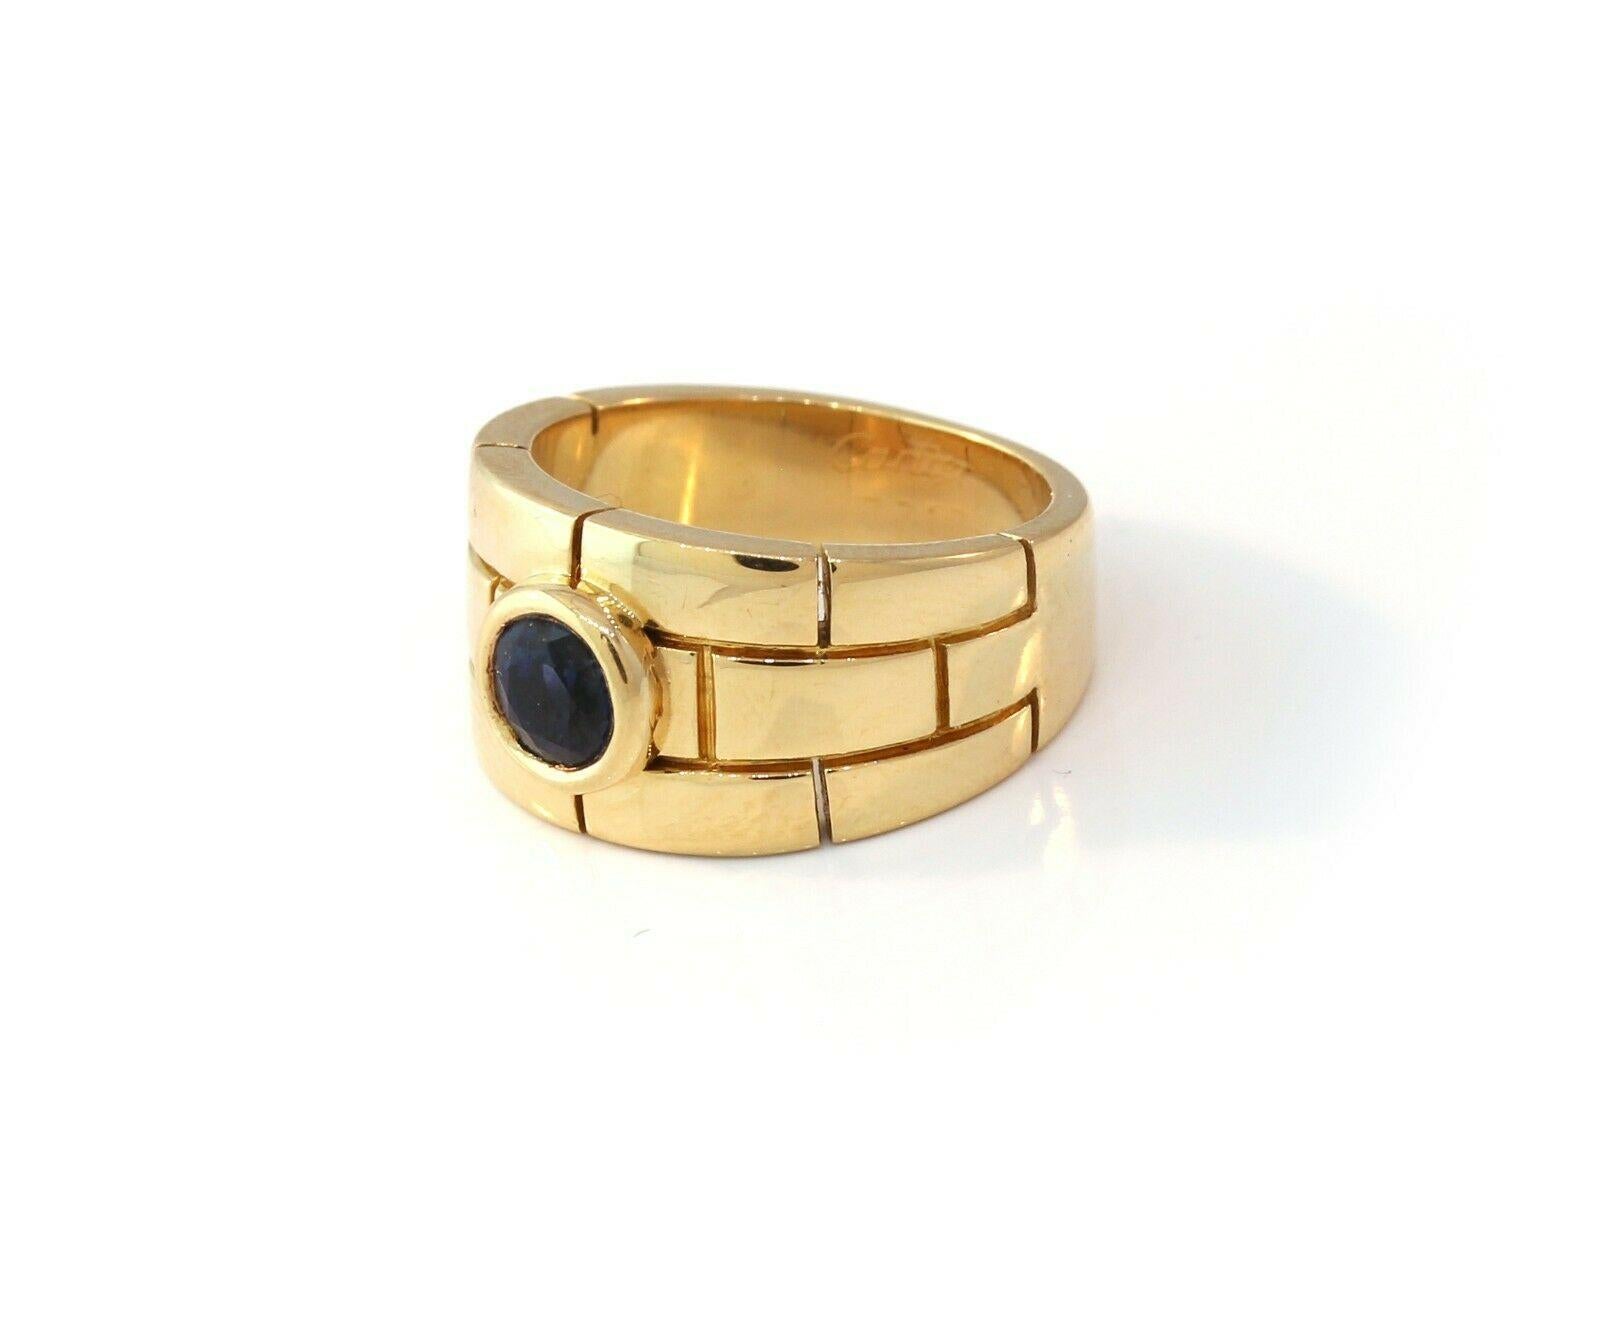 Cartier Maillon Panthere 18k Yellow Gold & Sapphire Band Ring Circa 1990s





Here is your chance to purchase a beautiful and highly collectible designer ring.  Truly a great piece at a great price! 



Ring Size: European size 50 / US size